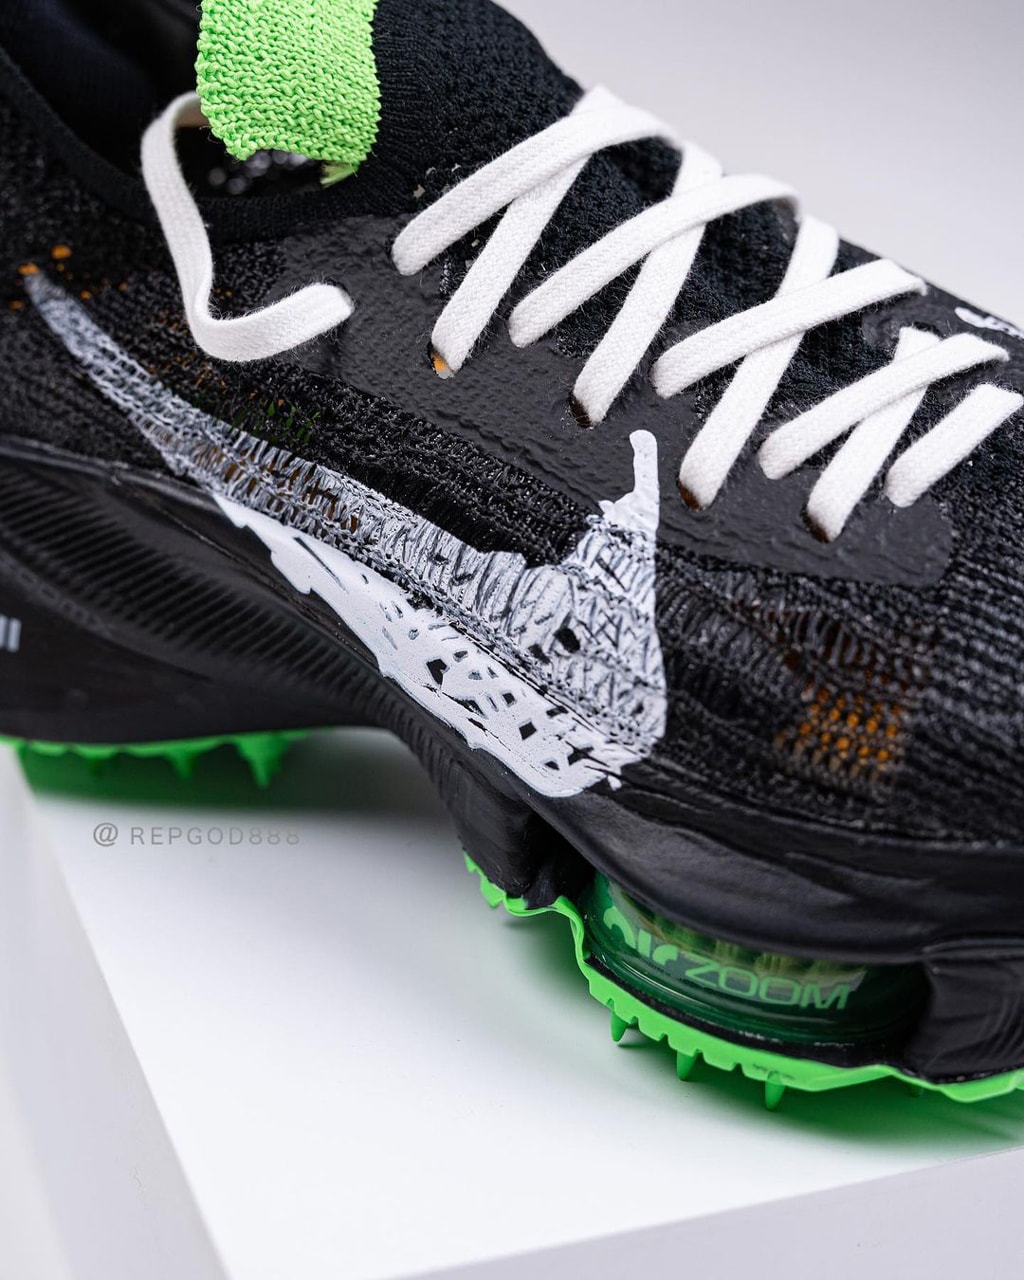 off white nike sportswear running air zoom tempo next percent black green white virgil abloh official release date info photos price store list buying guide